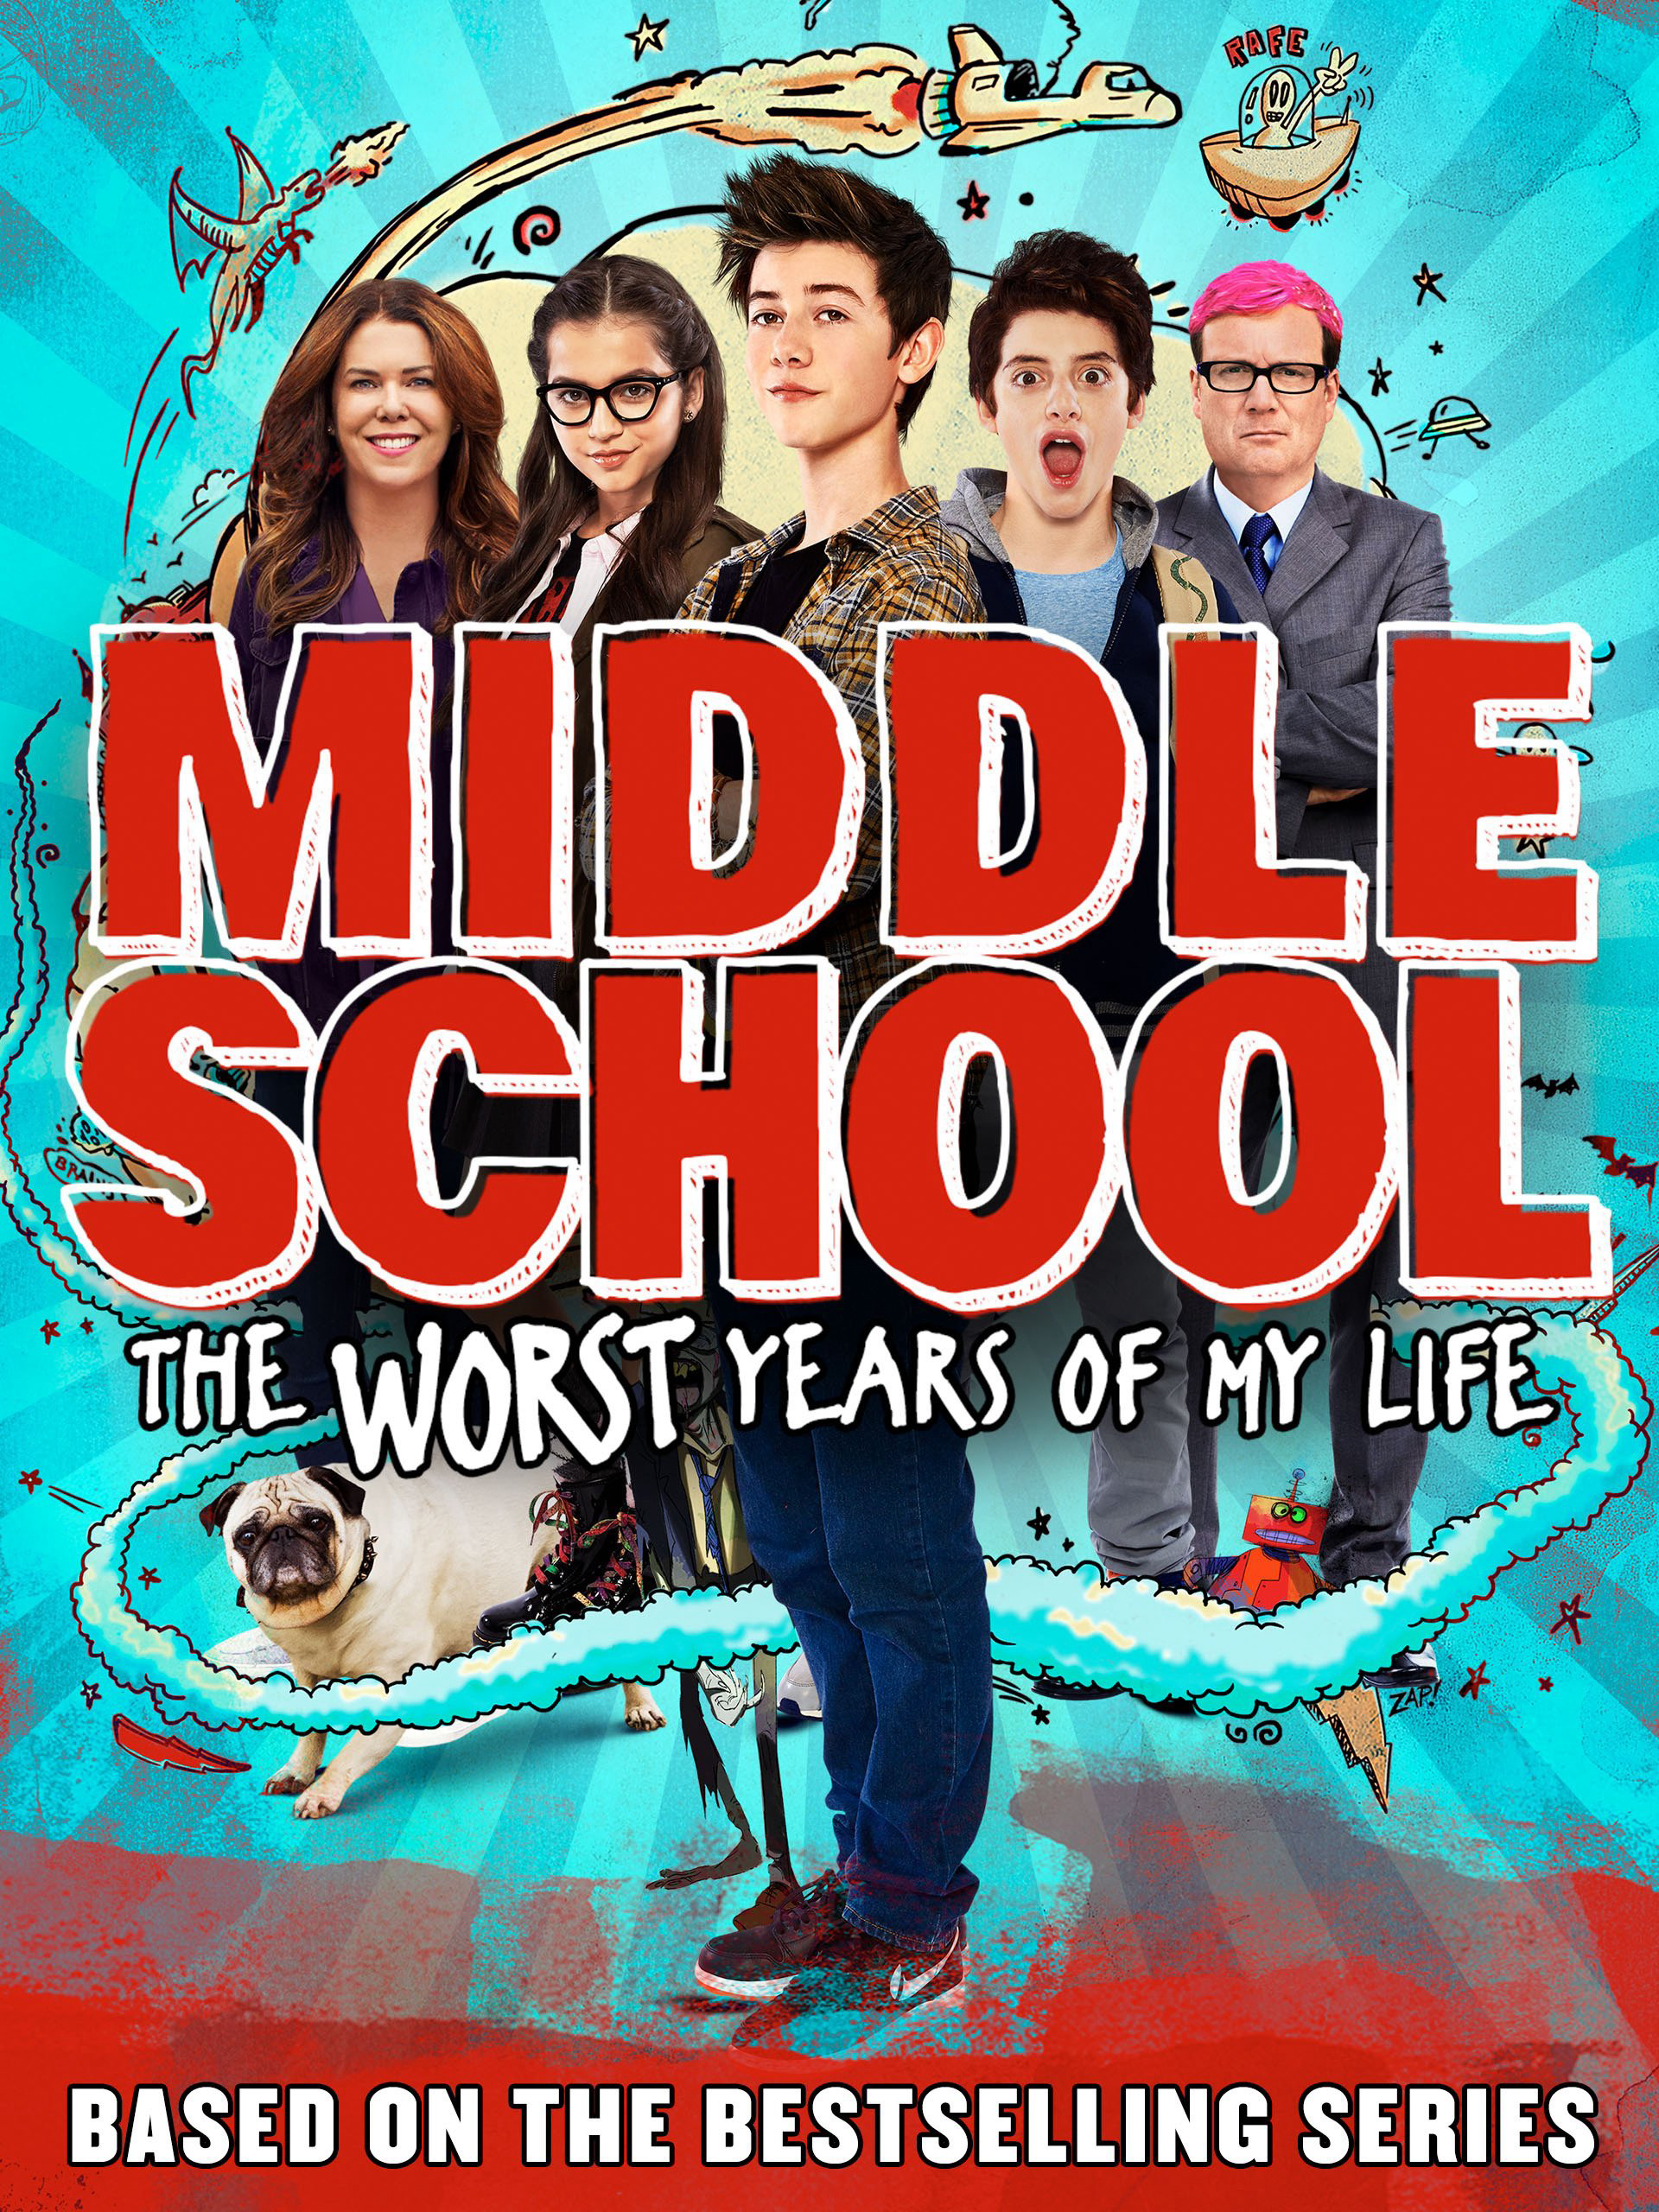 Poster Phim Đại Ca Học Đường (Middle School: The Worst Years Of My Life)